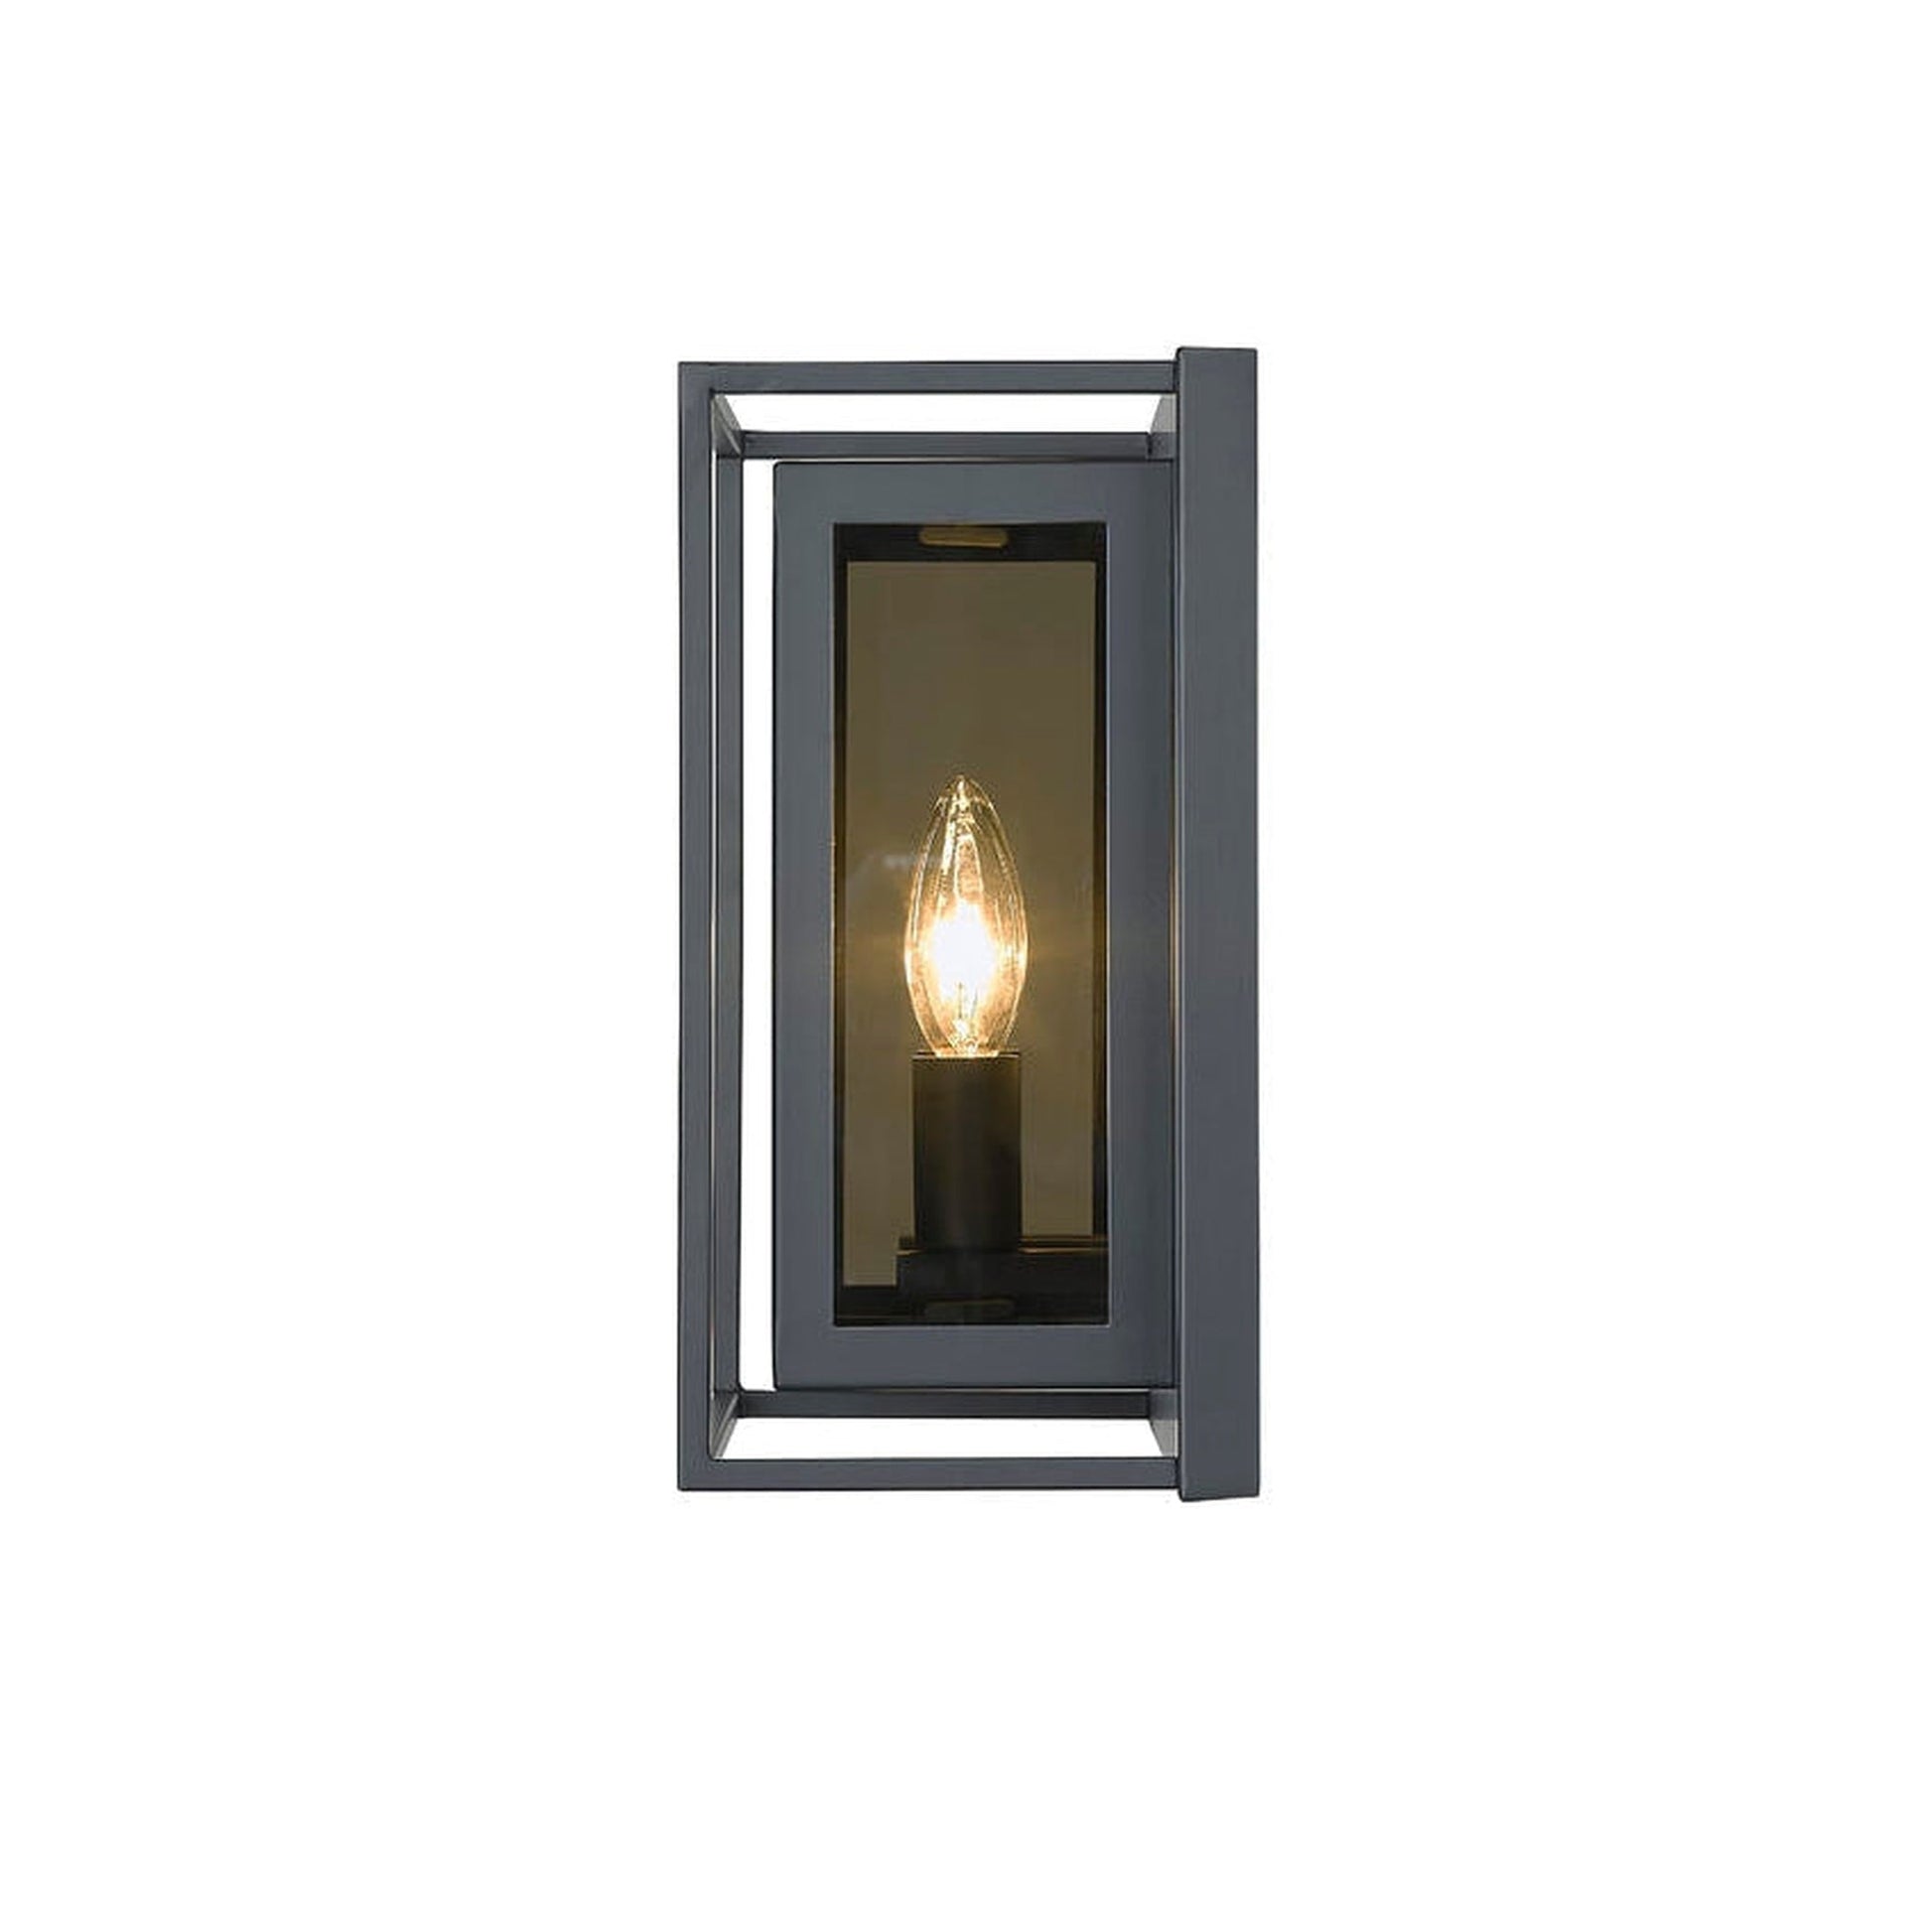 Z-Lite Infinity 8" 2-Light Misty Charcoal Wall Sconce With Smoke Mirror Glass Shade